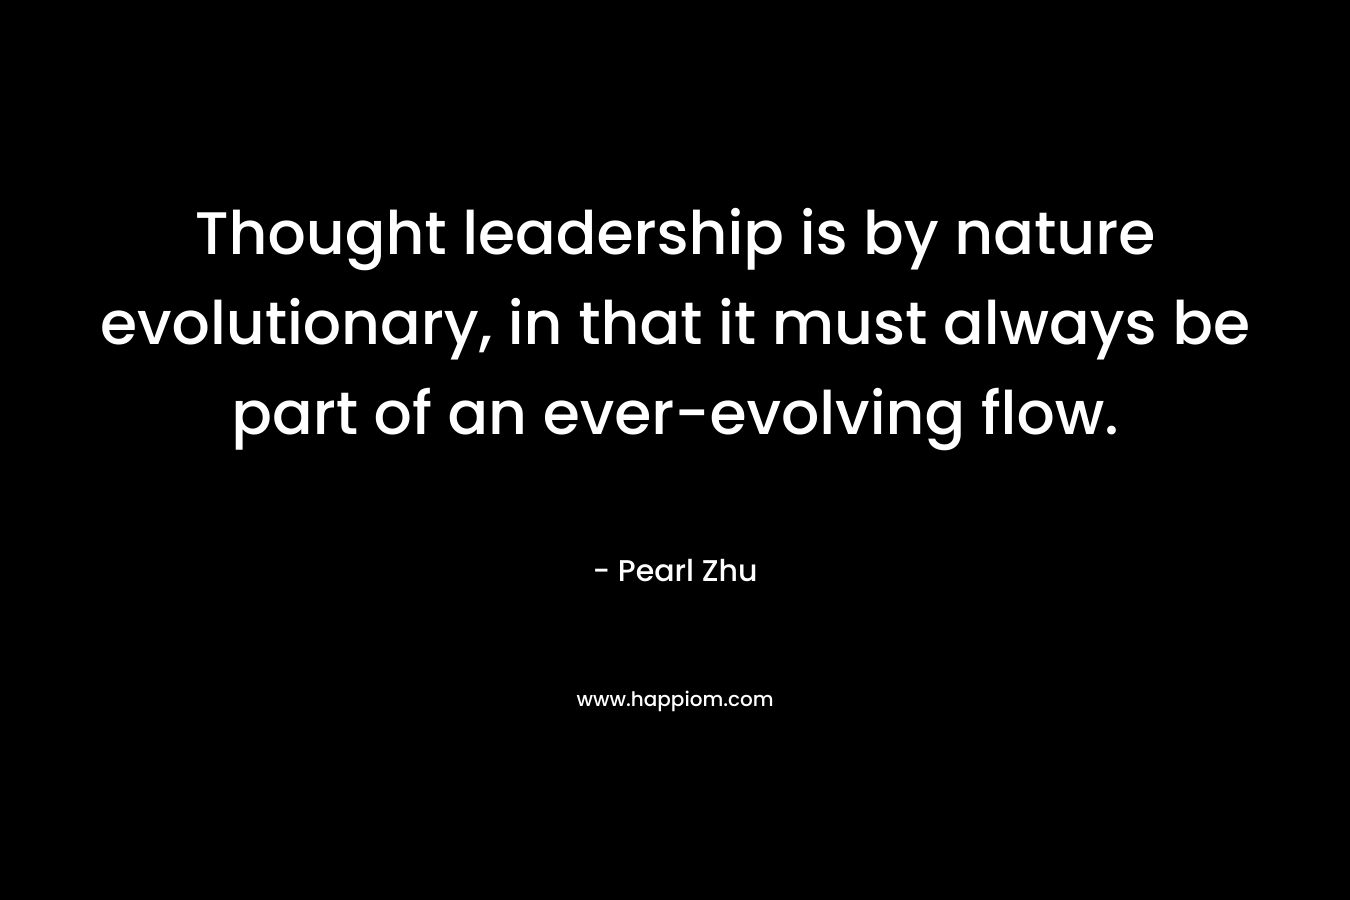 Thought leadership is by nature evolutionary, in that it must always be part of an ever-evolving flow.